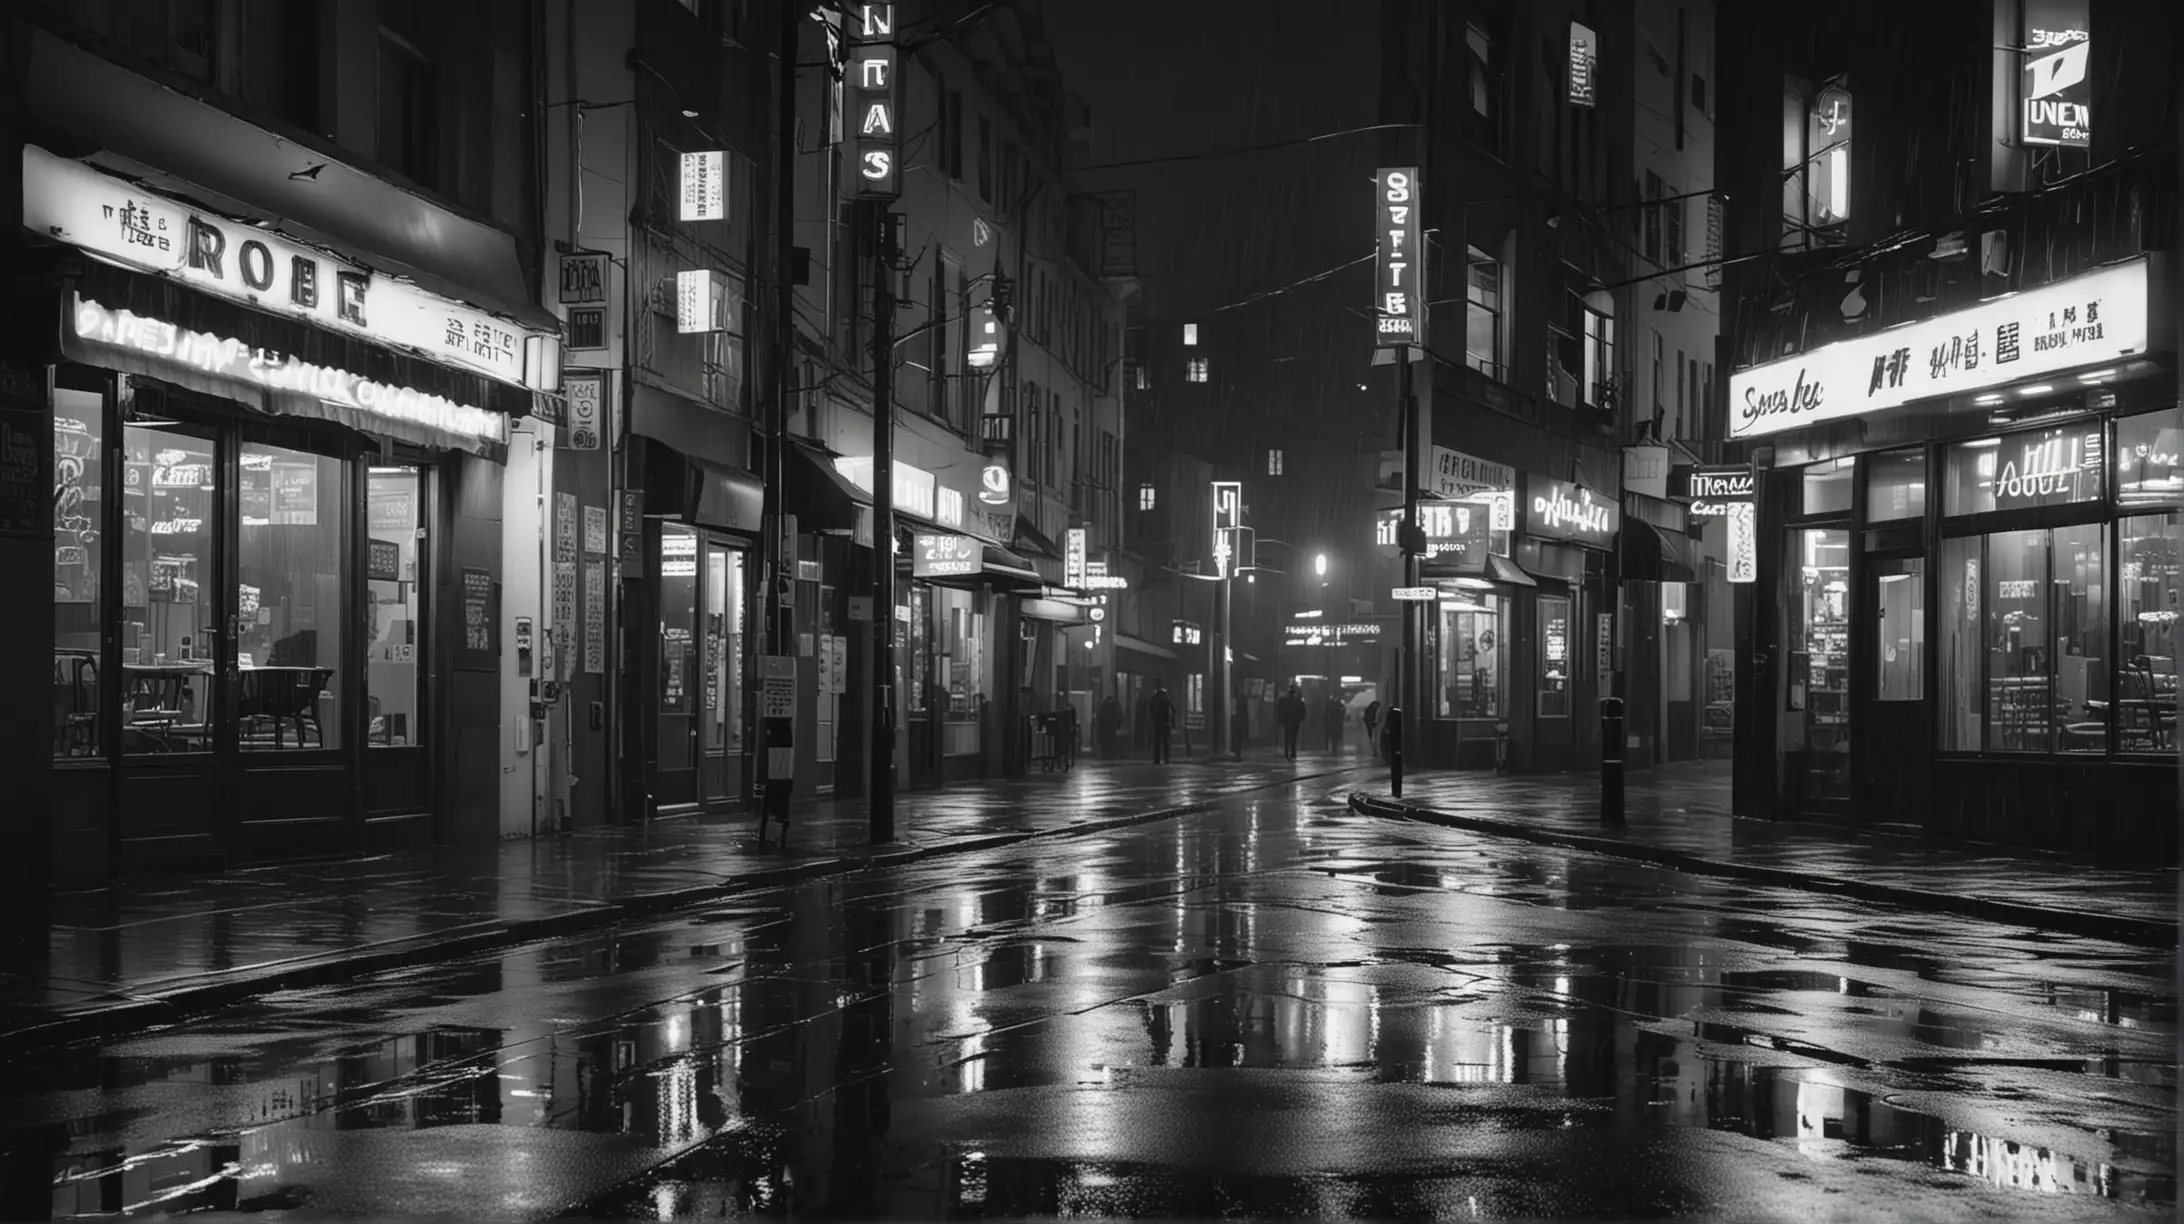 Monochrome Neon Signs in a City, Rainy Night, Light Reflected by Rain